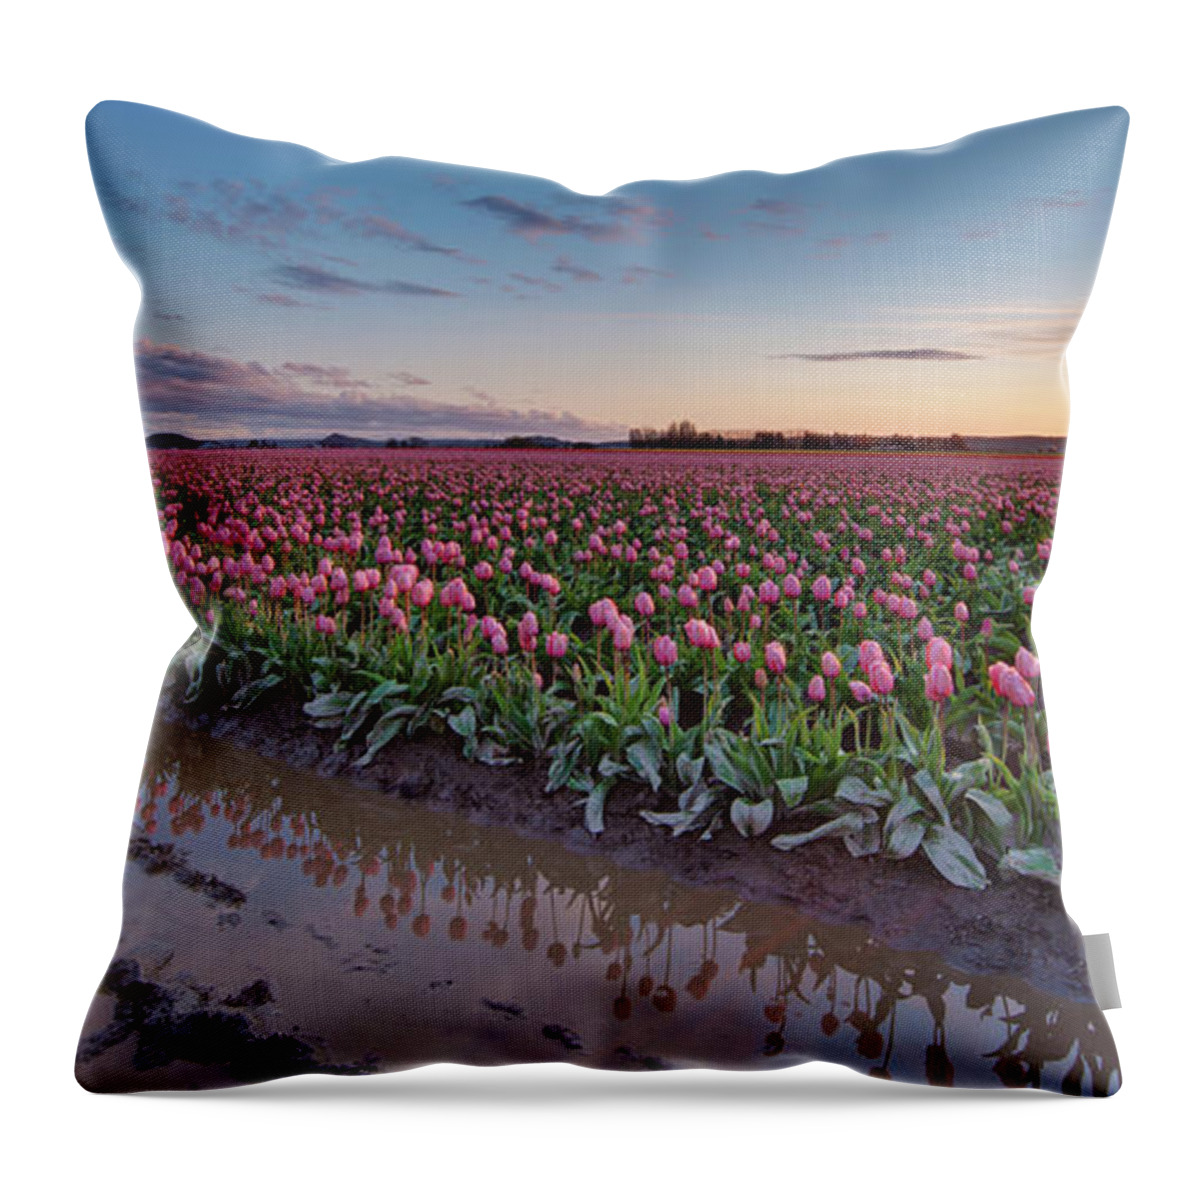 Skagit Valley Tulip Festival Throw Pillow featuring the photograph Skagit Valley Tulip Reflections by Mike Reid